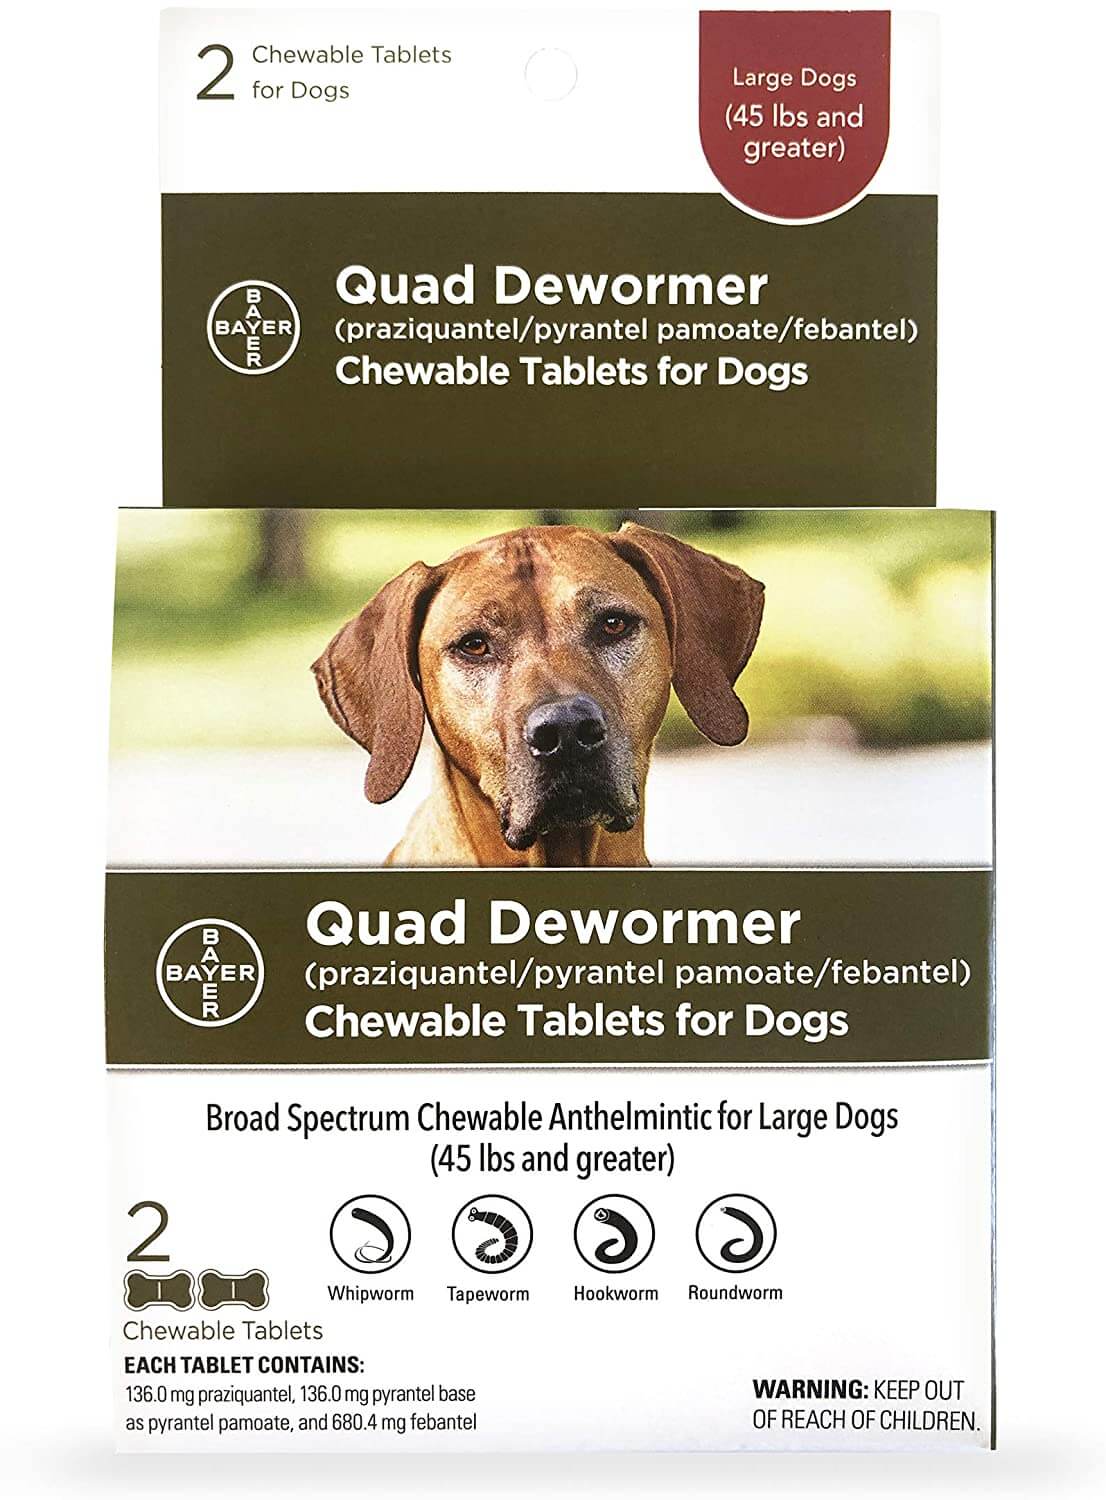 Bayer Chewable Quad Dewormer for Dogs